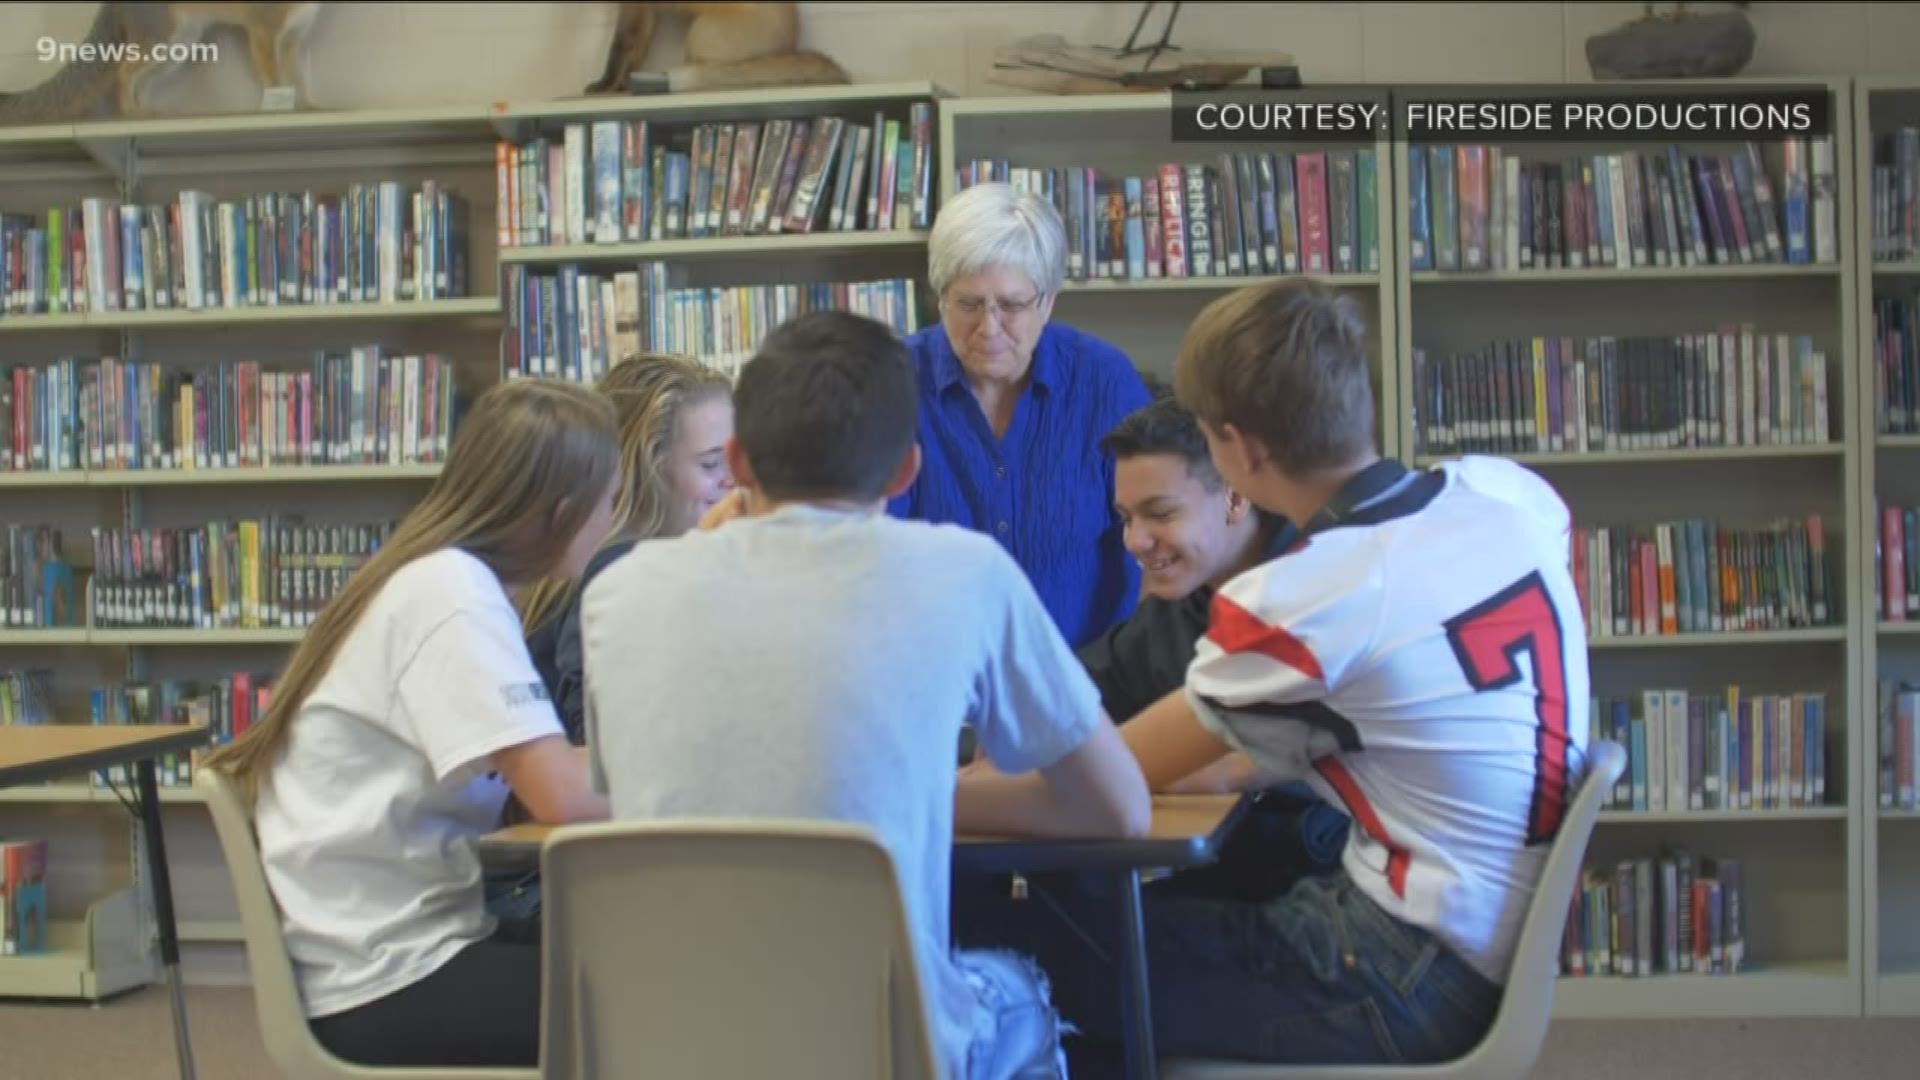 La Veta Highs School wins Colorado Succeeds prize with help of their community. They use real-life experiences to get students ready for what's next.